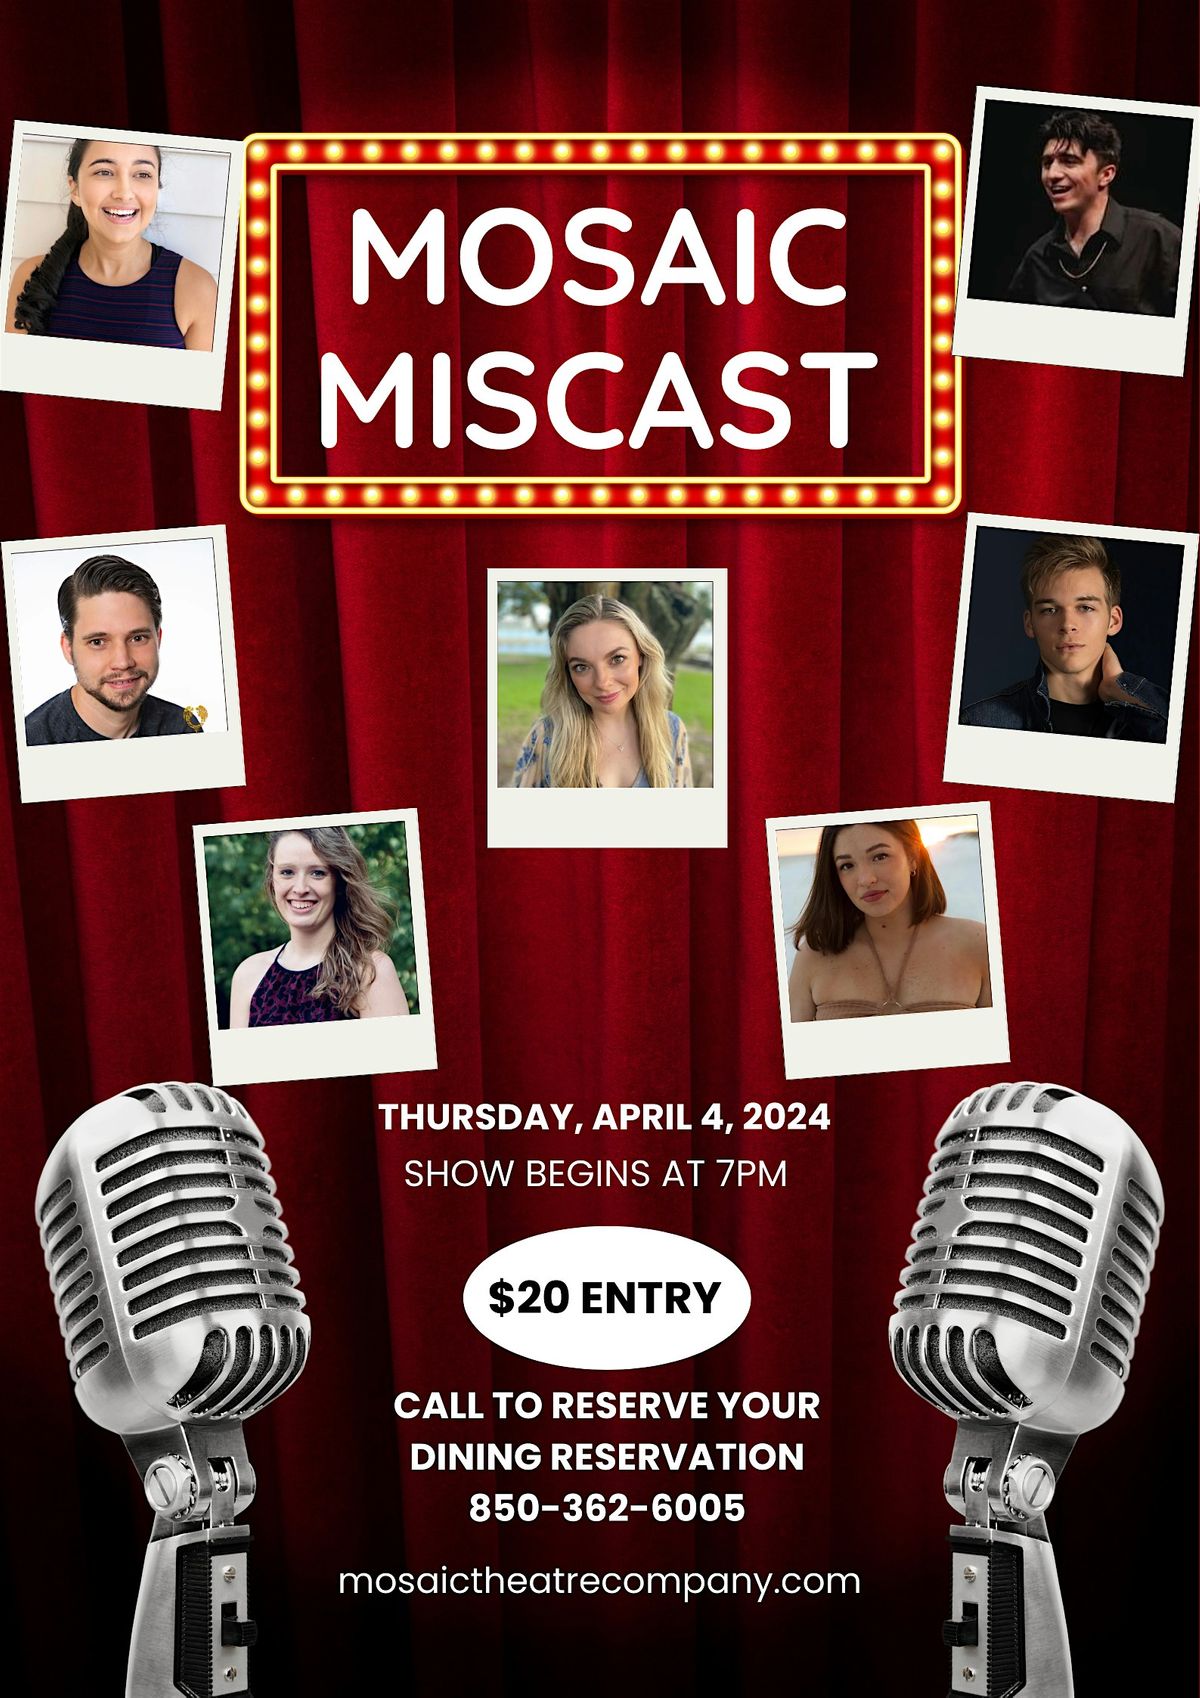 Mosaic's Miscast: A Fundraising Cabaret